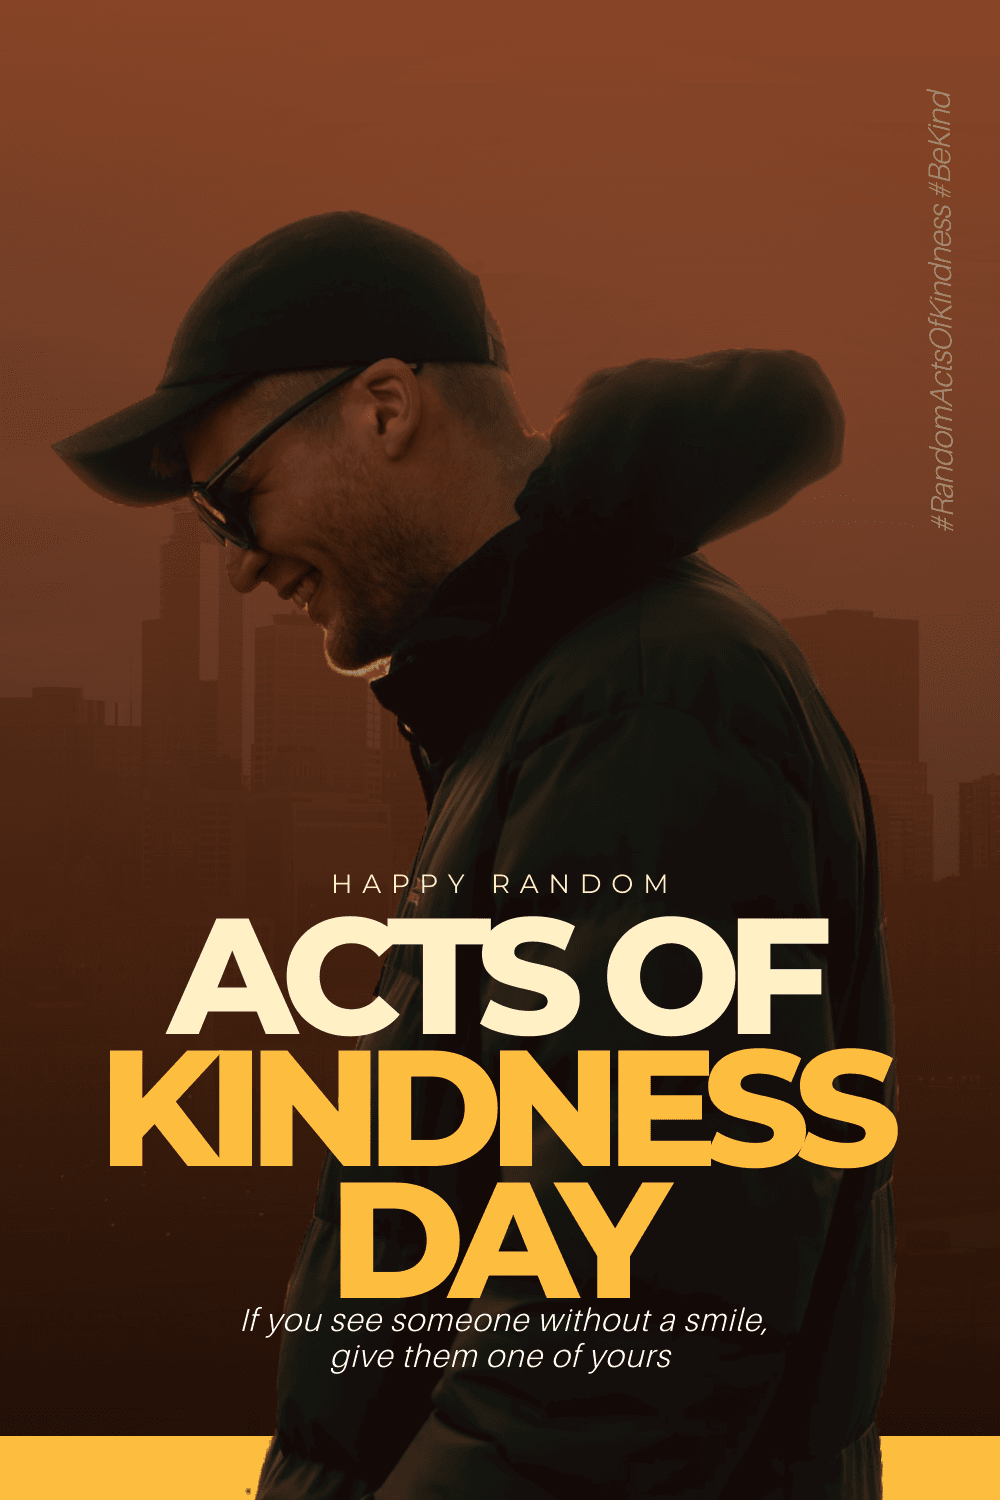 modern-background-random-acts-of-kindness-day-pinterest-pin-template-thumbnail-img